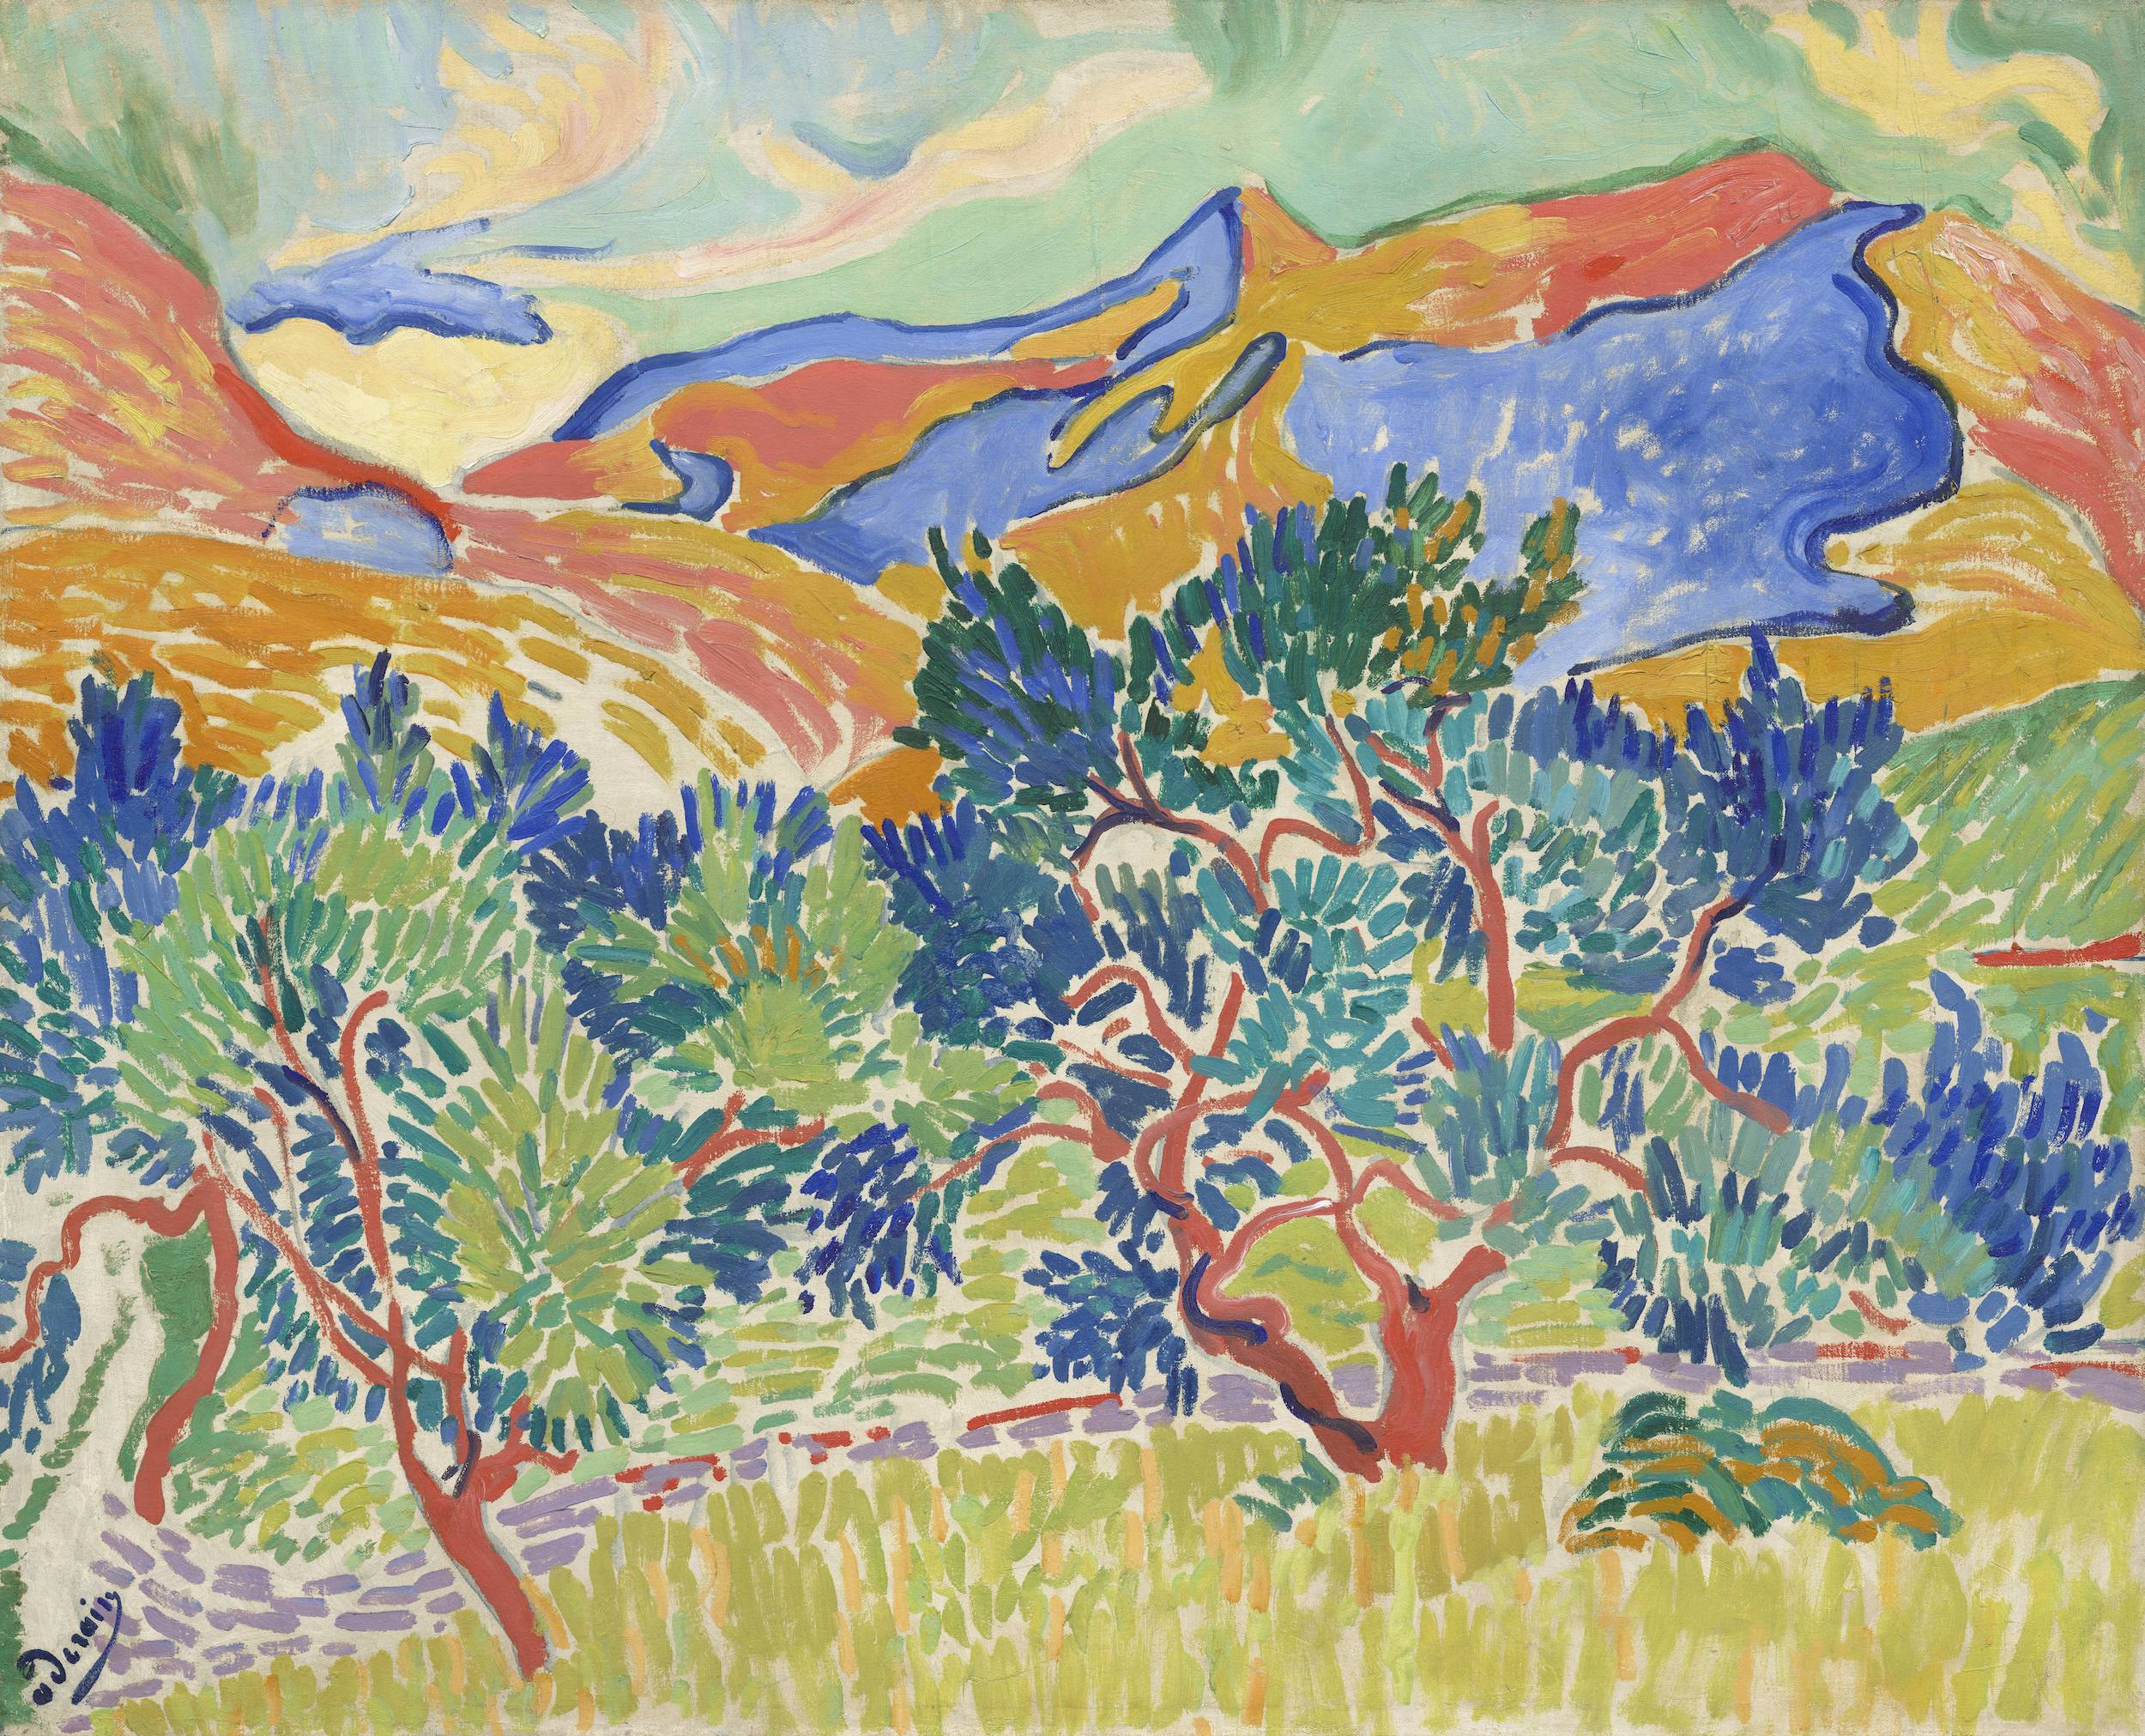 "Mountains at Collioure" by André Derain, an exuberant Fauvist landscape featuring rolling hills and trees in a riot of bright colors, with blue, green, yellow, and red dominating the canvas.